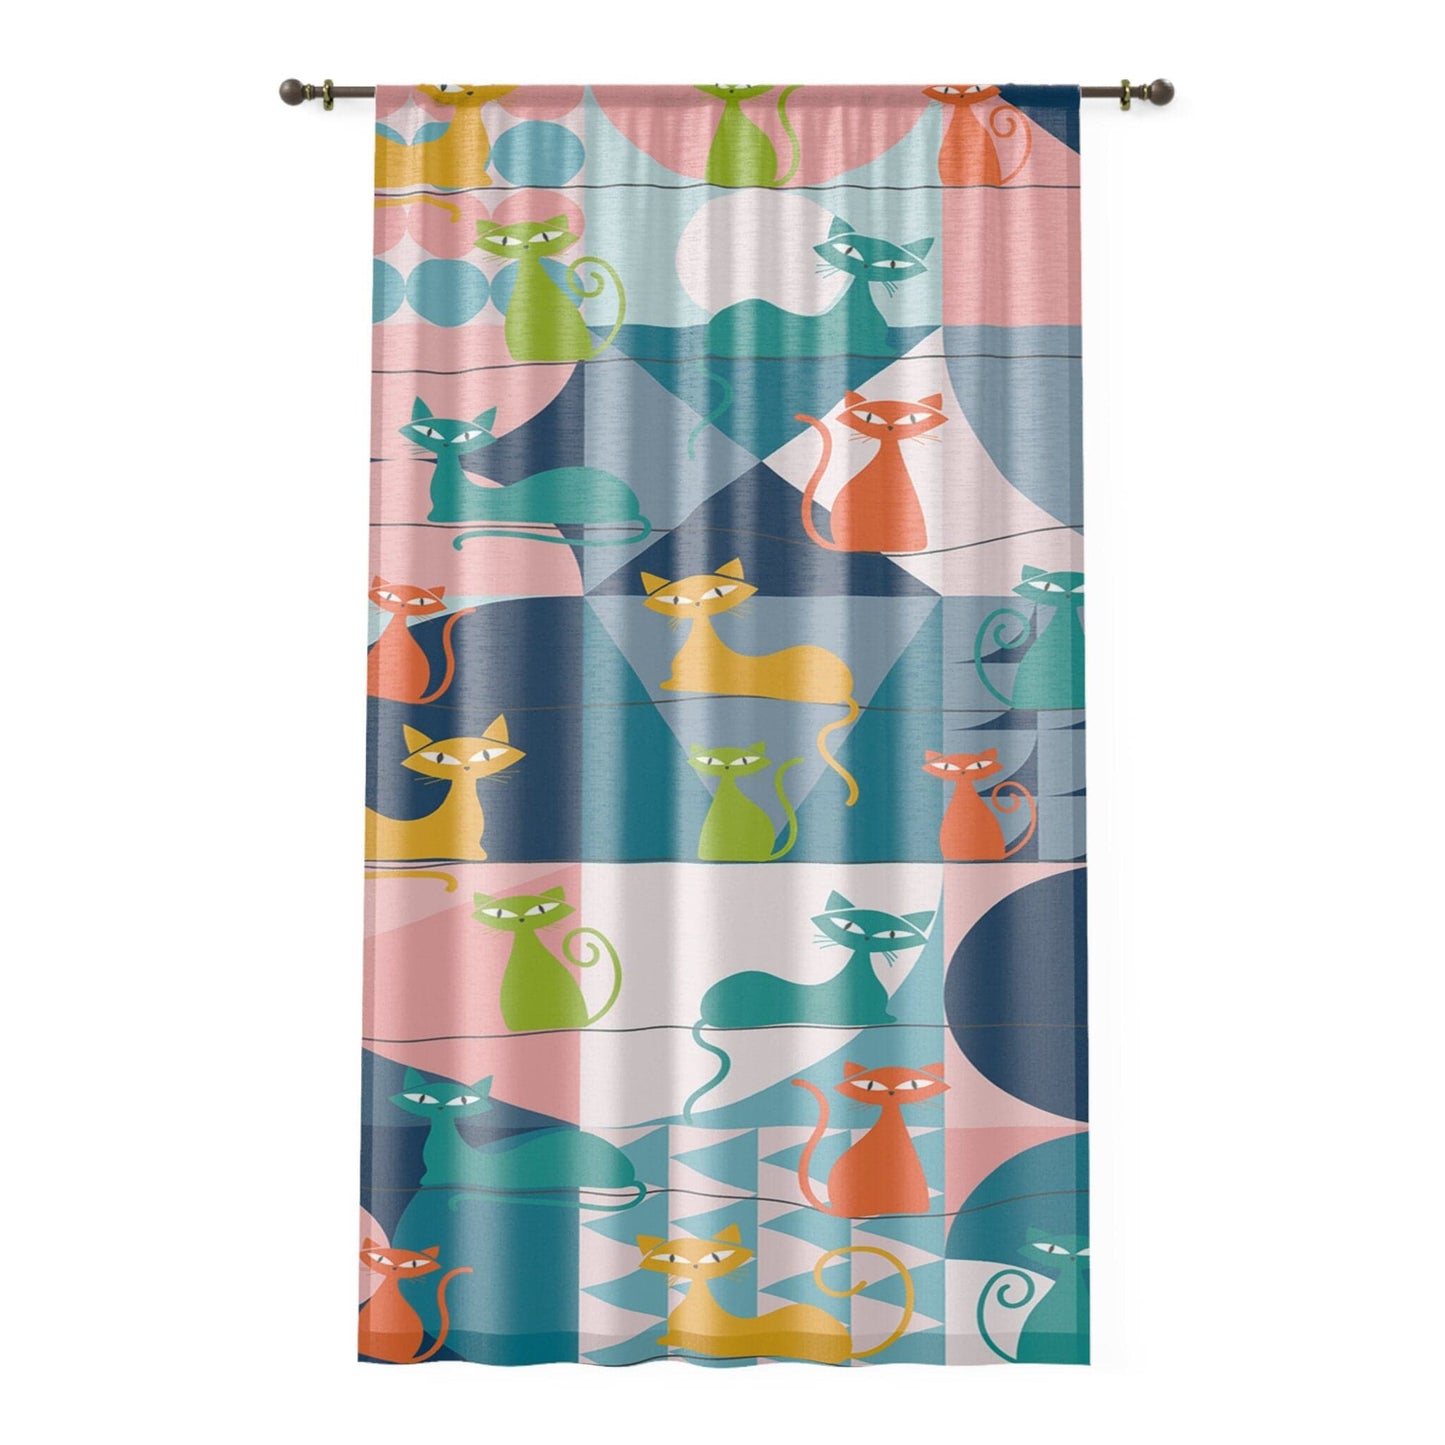 Mid Century Modern Atomic Kitschy Cats Window Curtain in Geometric Retro Teal, Pink, Orange, and Yellow, Sheer & Blackout MCM Window Panels